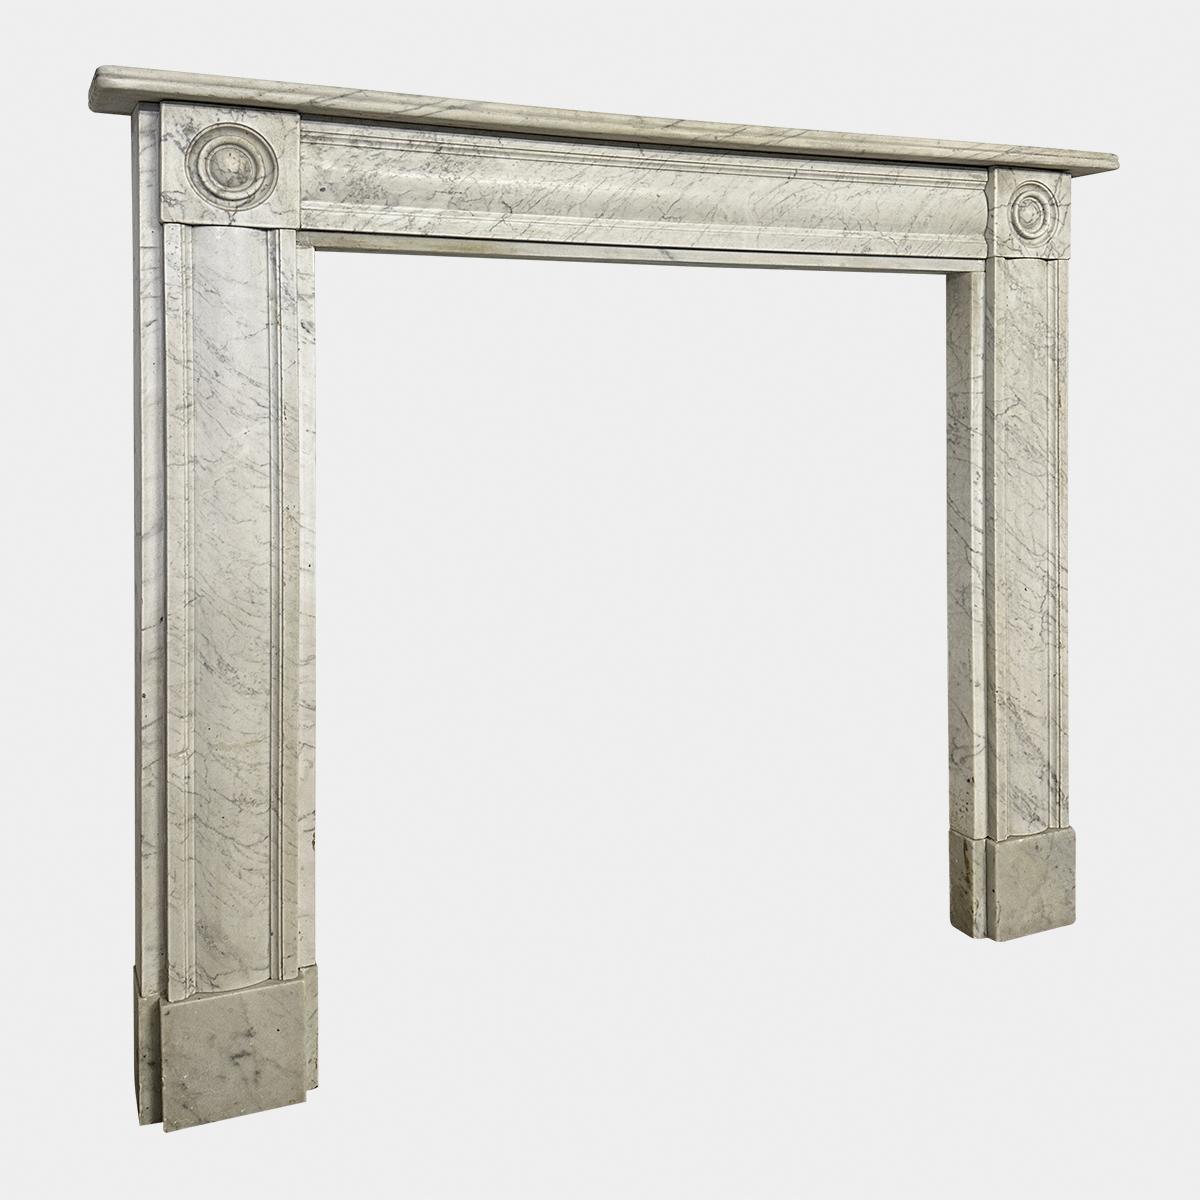 An English Regency period Fireplace executed in Italian Carrara marble. A very good example of this style of surround, The jambs stood on square foot blocks with a wide cushion moulding terminating in carve roundel 